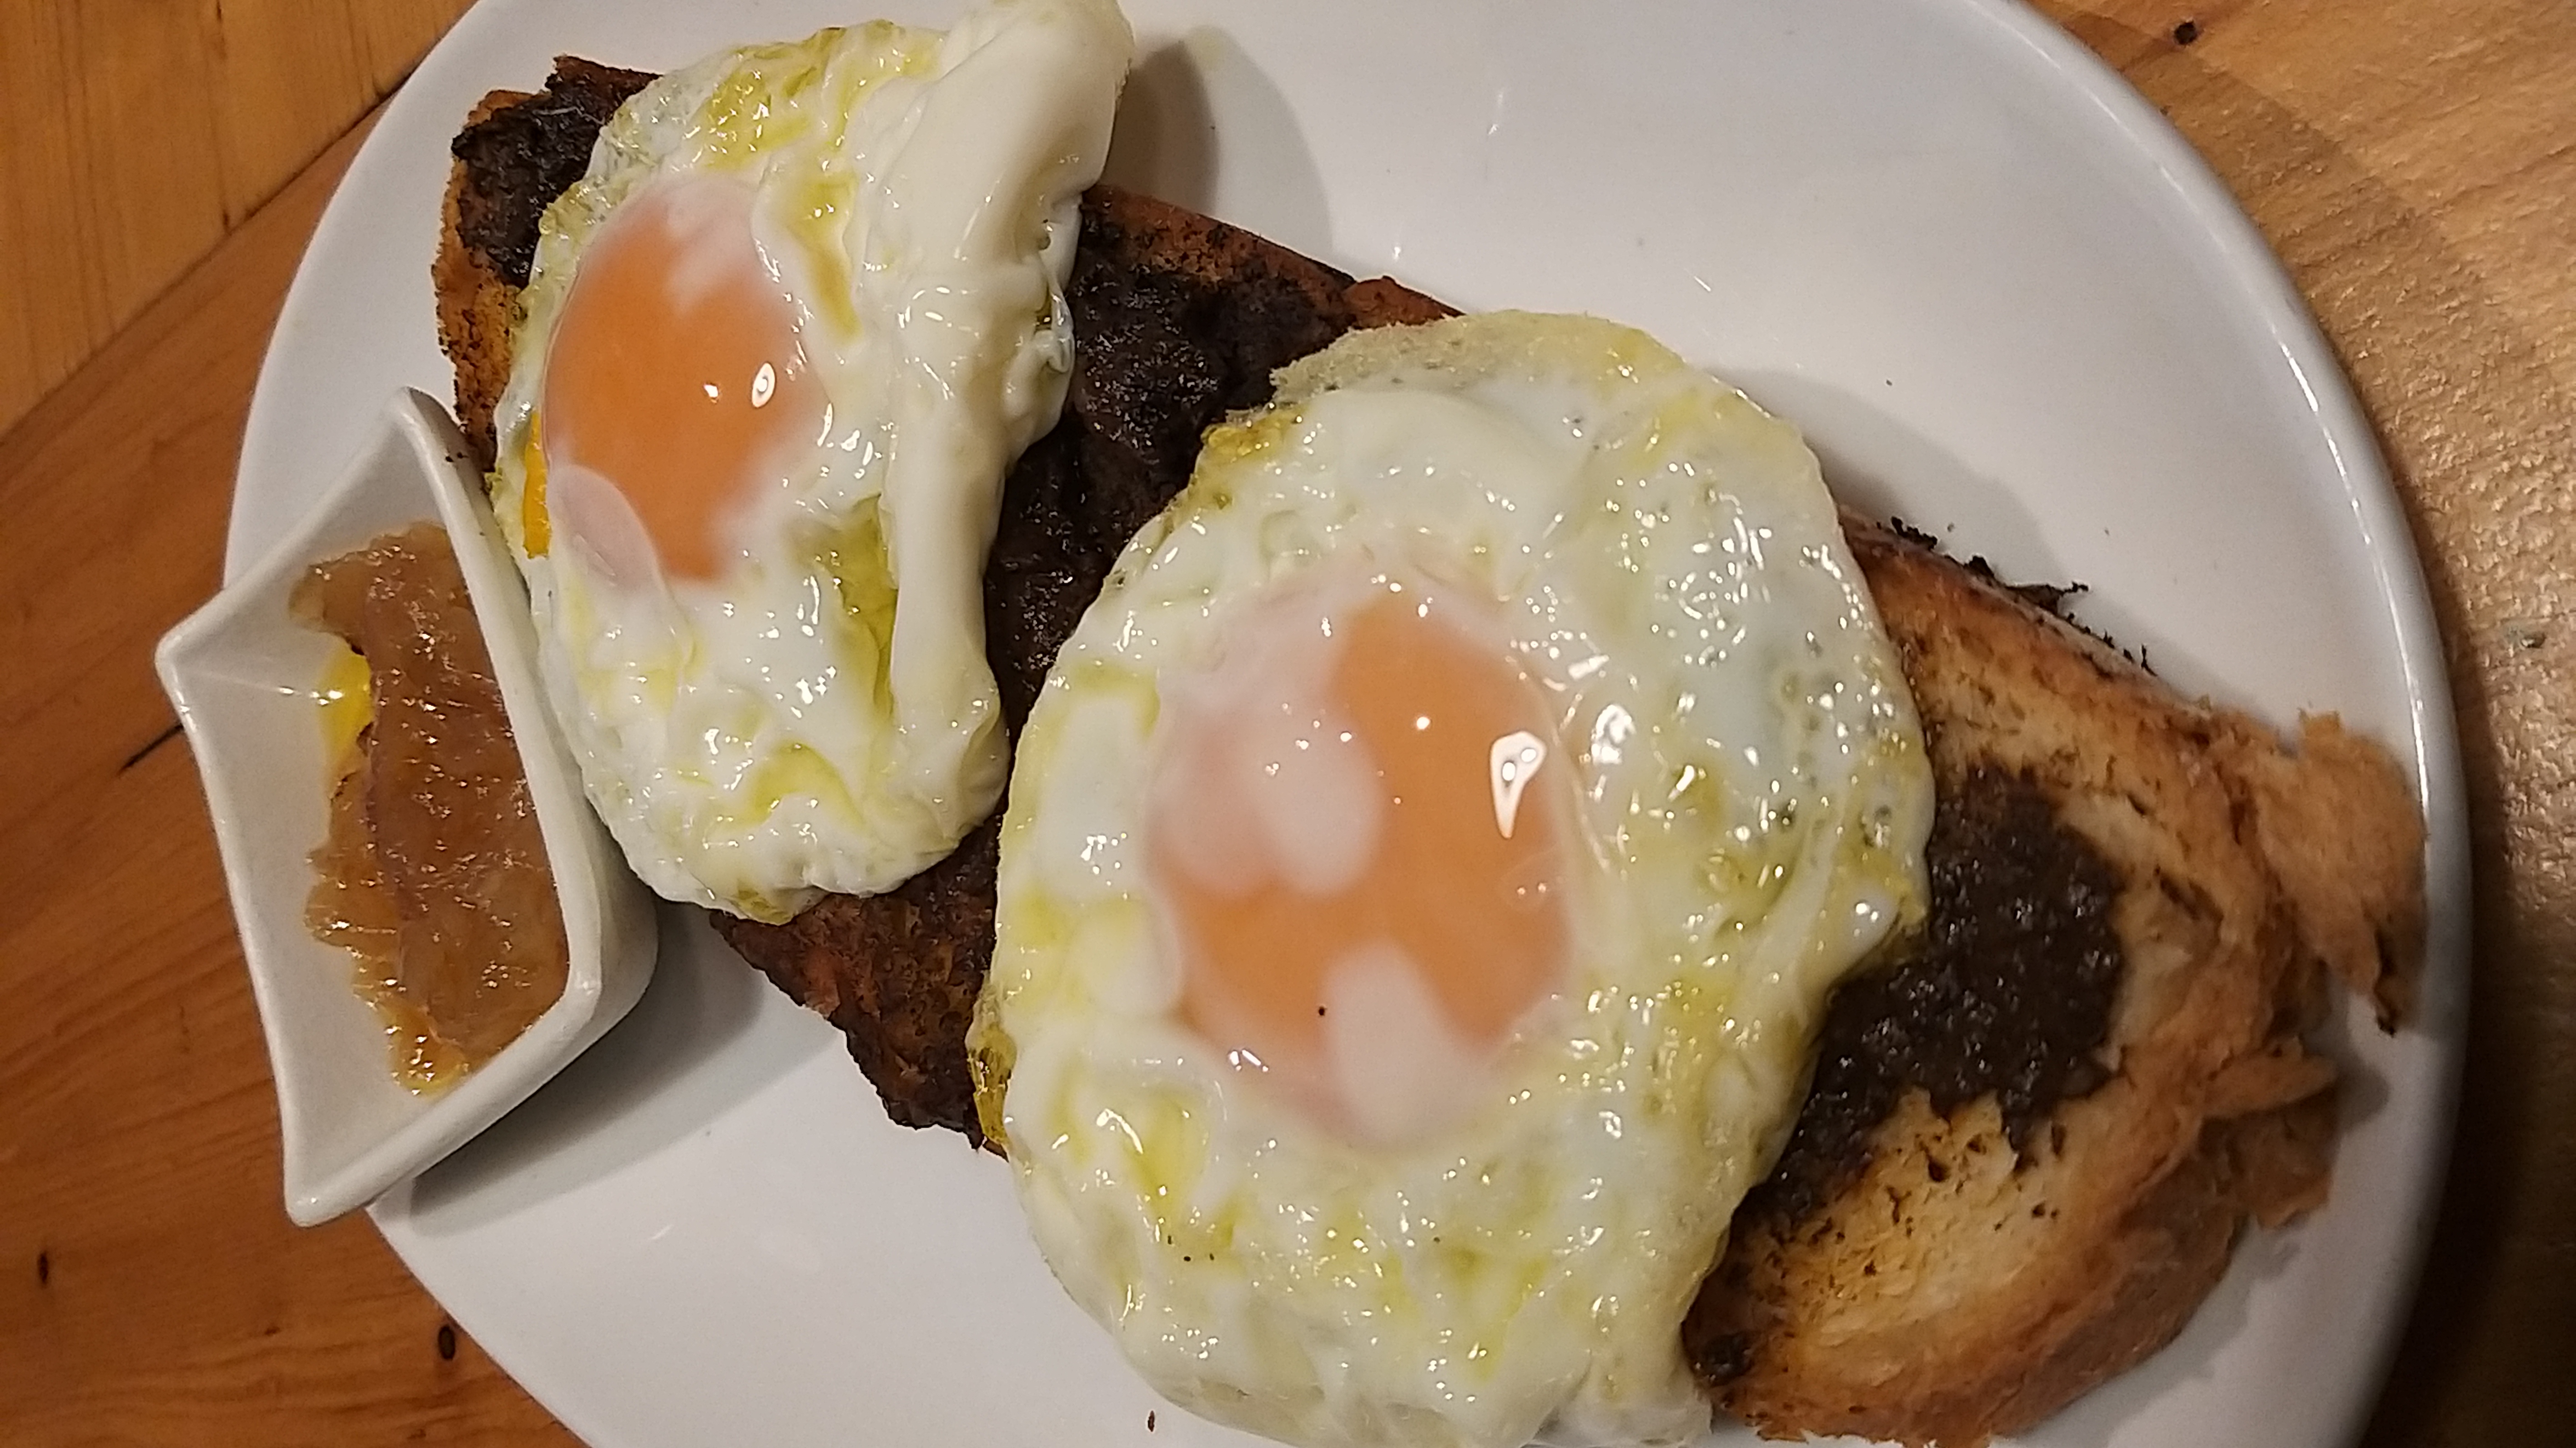 Black pudding from León with free-range fried eggs